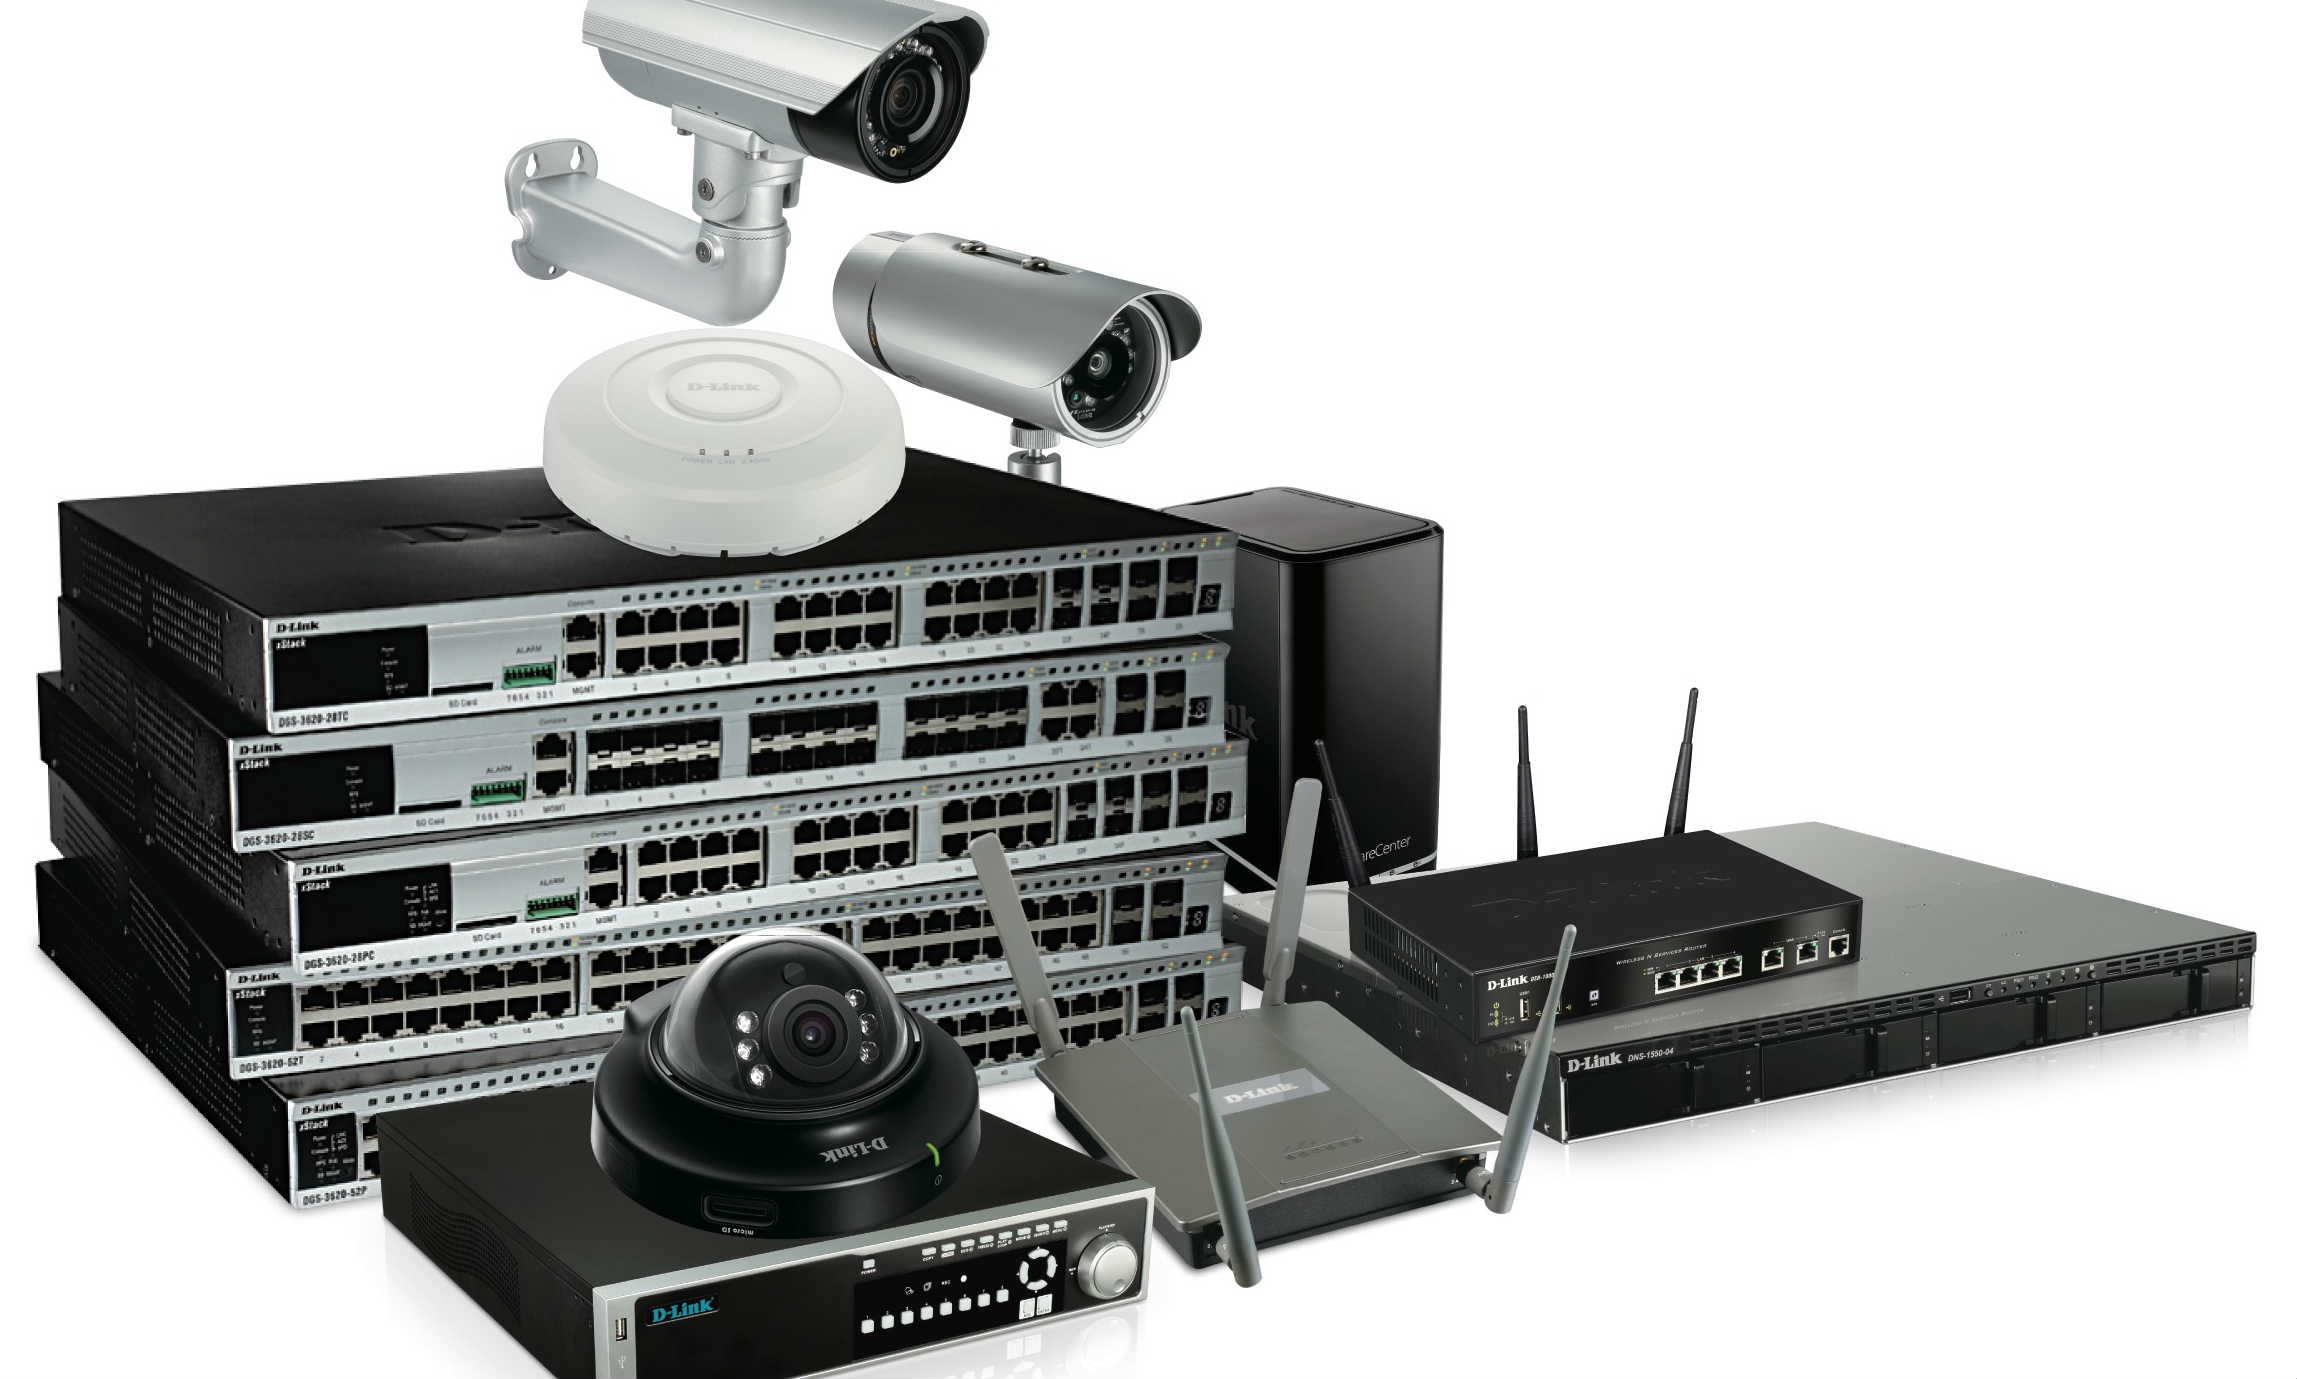 D-Link roadshows helping security installers